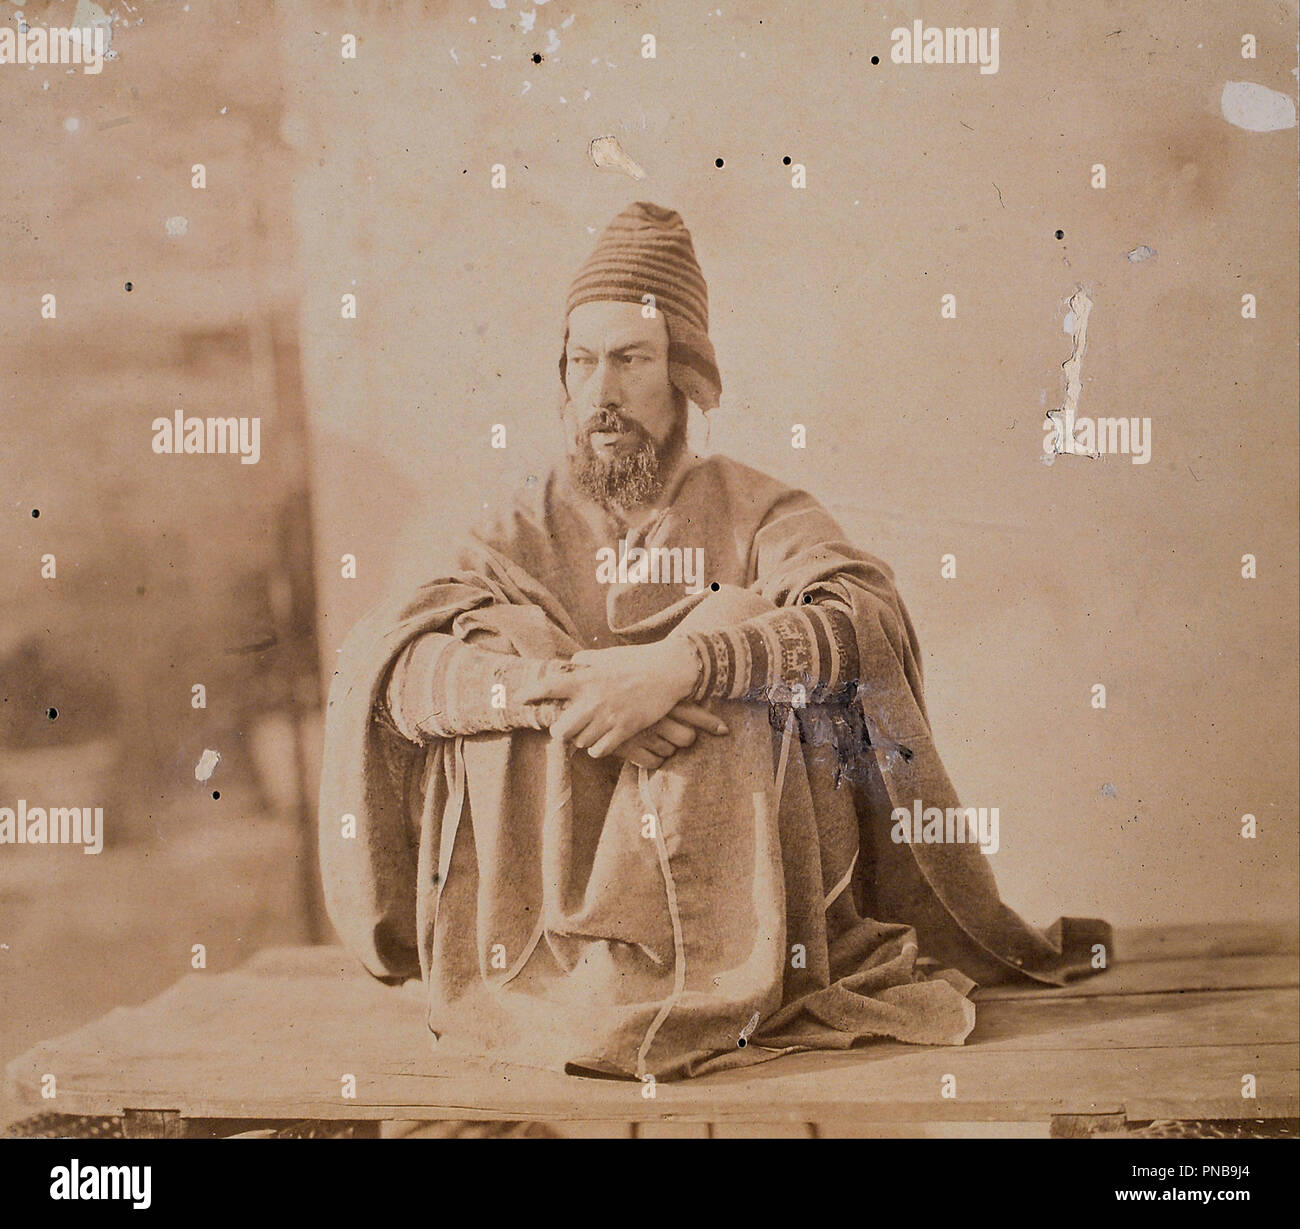 Self portrait in native costume. Date/Period: 1868. Print on albumin paper. Height: 212 mm (8.34 in); Width: 242 mm (9.52 in). Author: Francisco Laso. Stock Photo